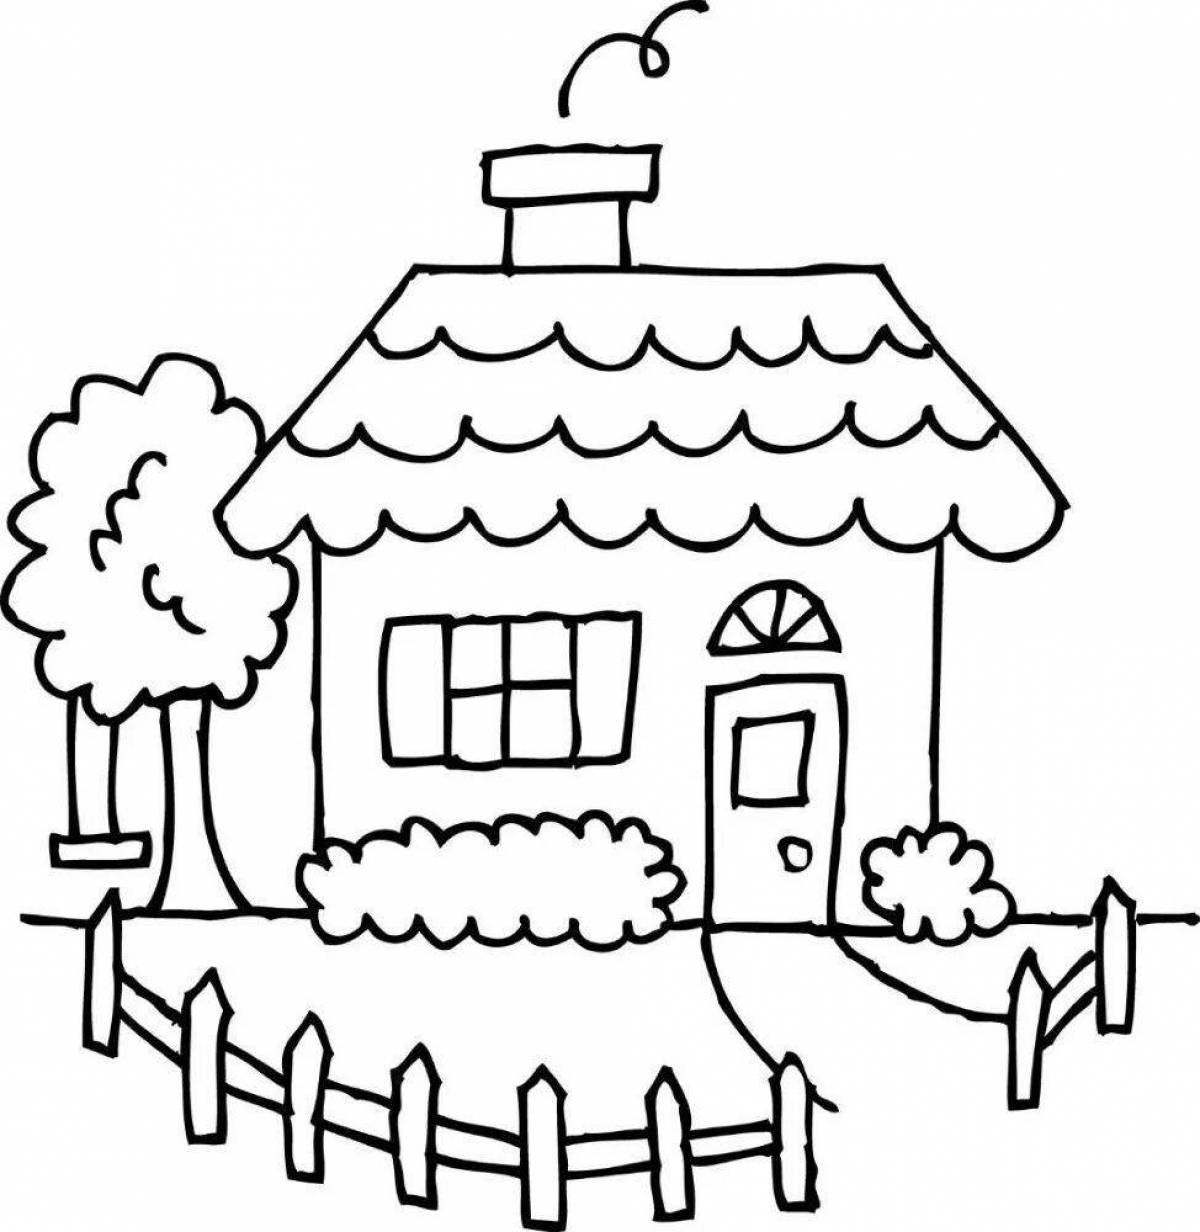 Drawing of a dreamy house